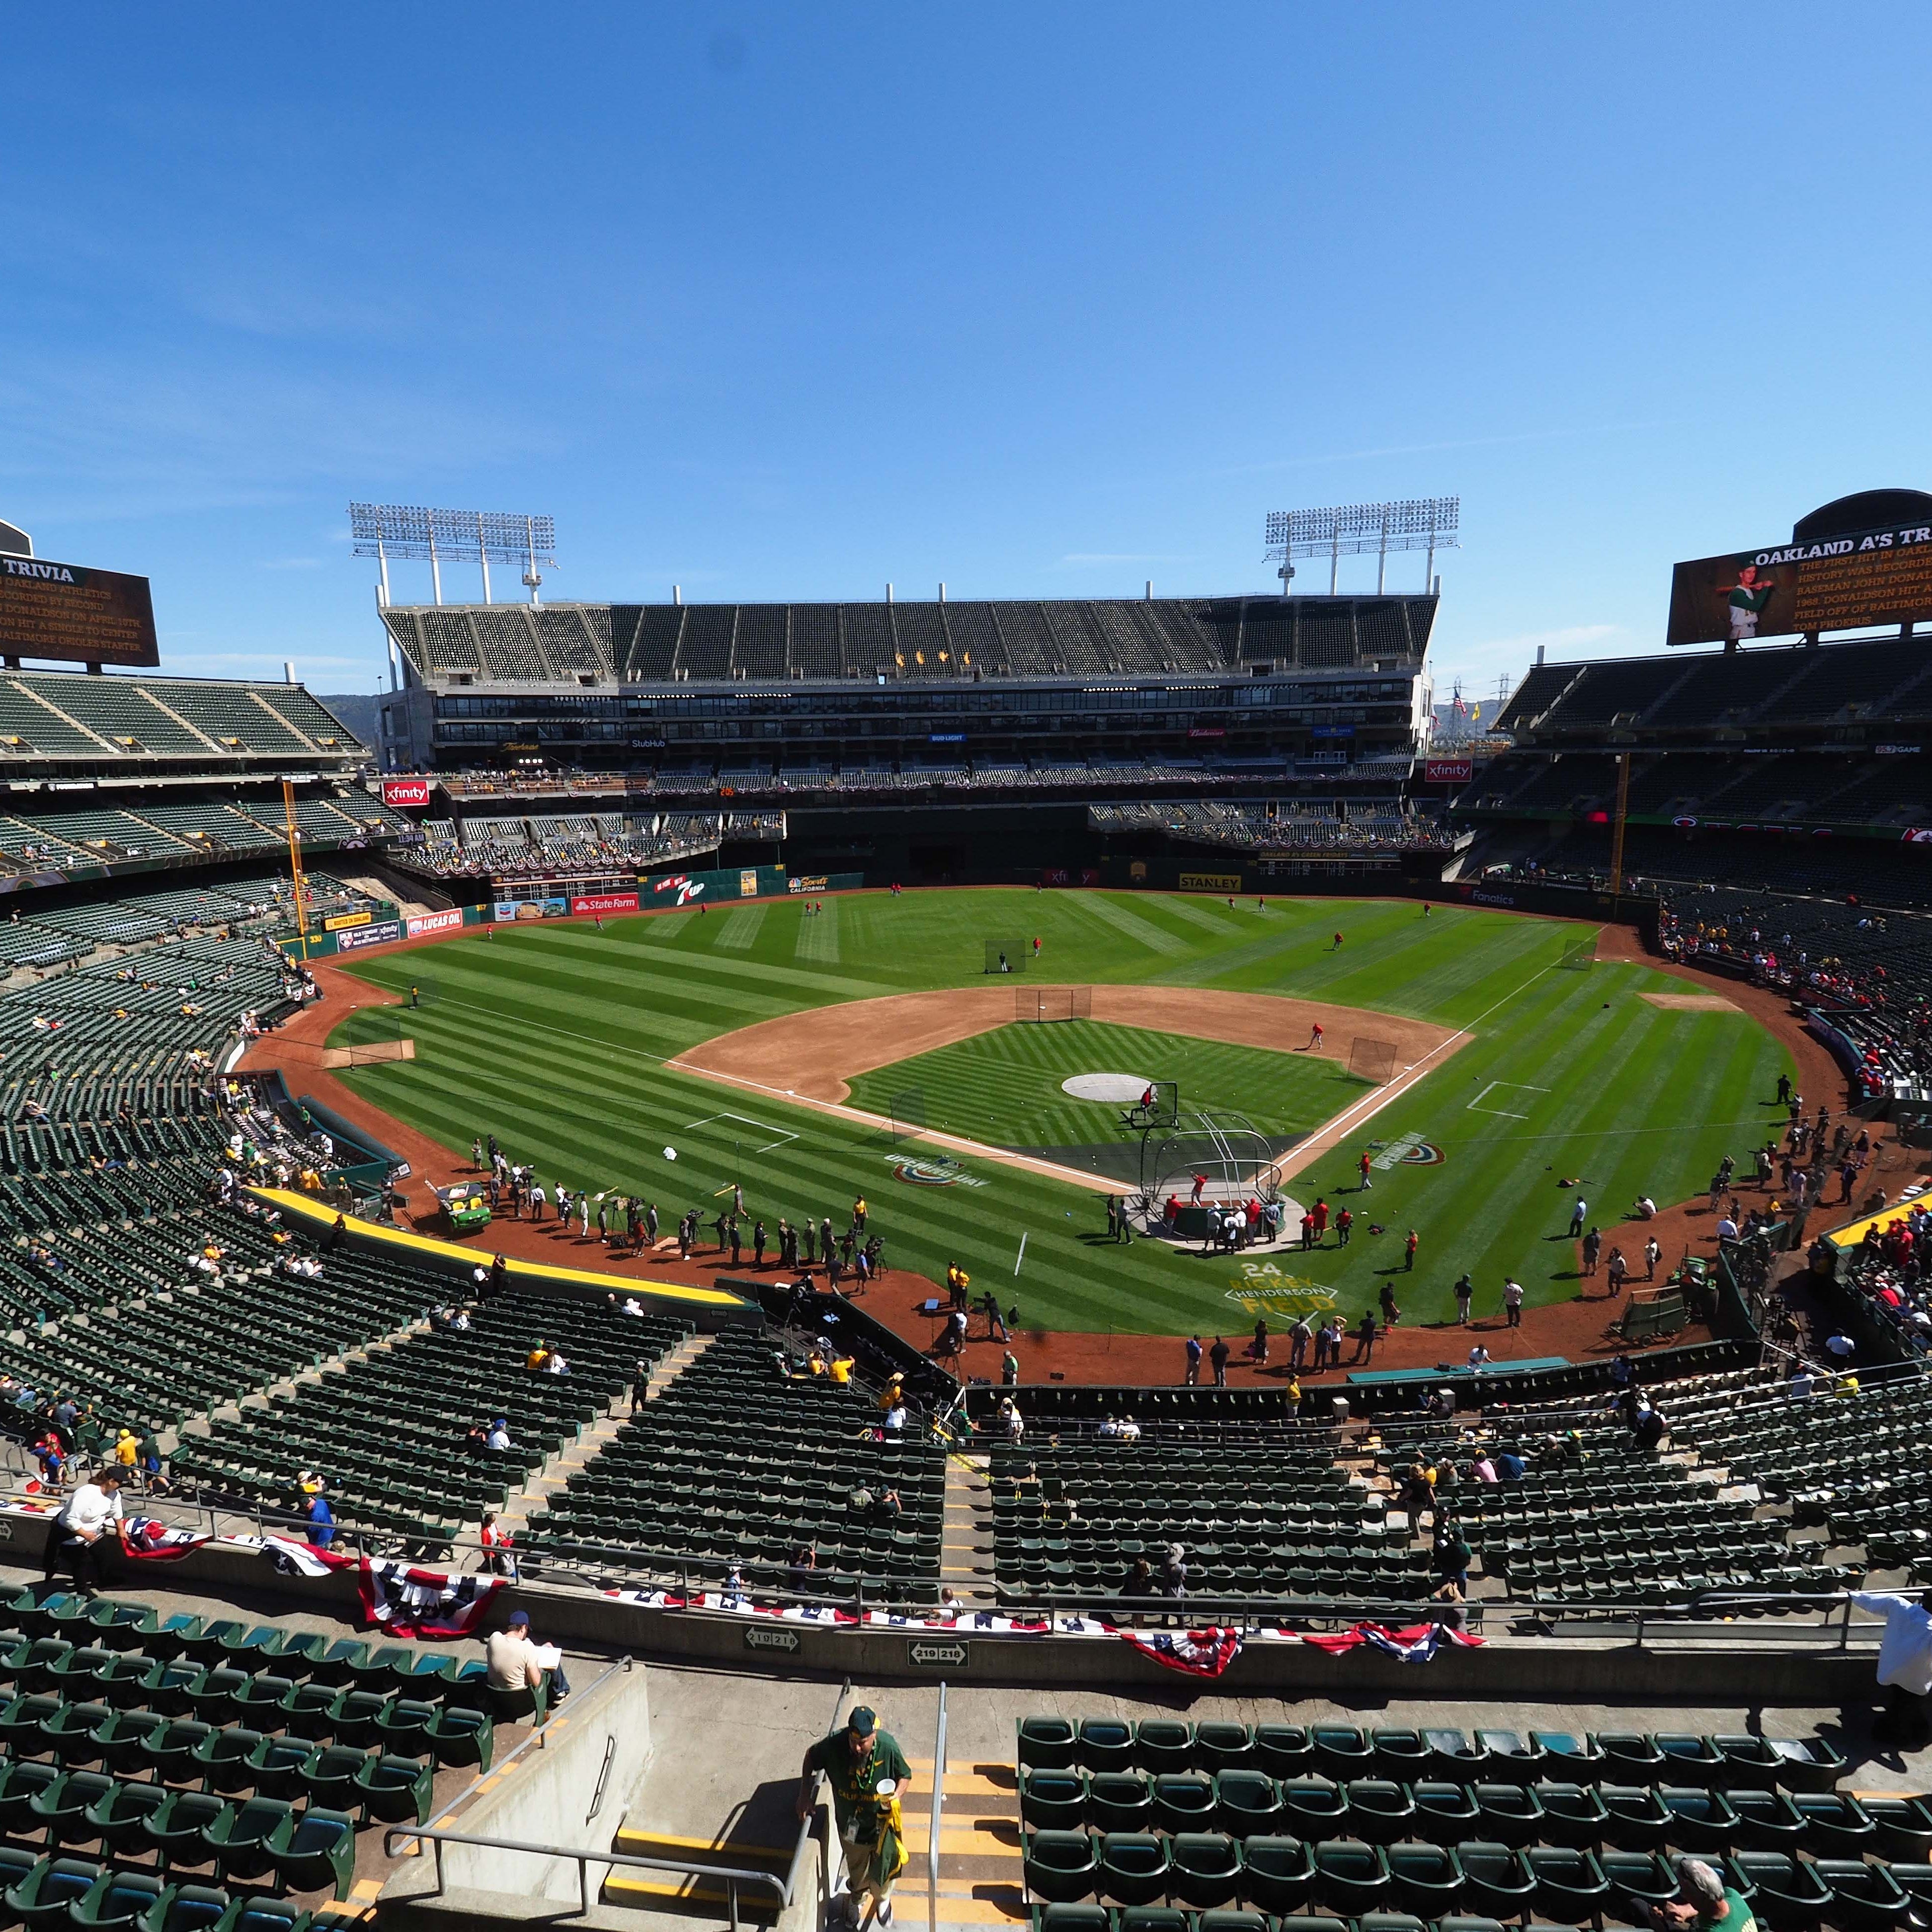 Stadium view before the game between the Oakland Athletics and the Los Angeles Angels at Oakland Coliseum.